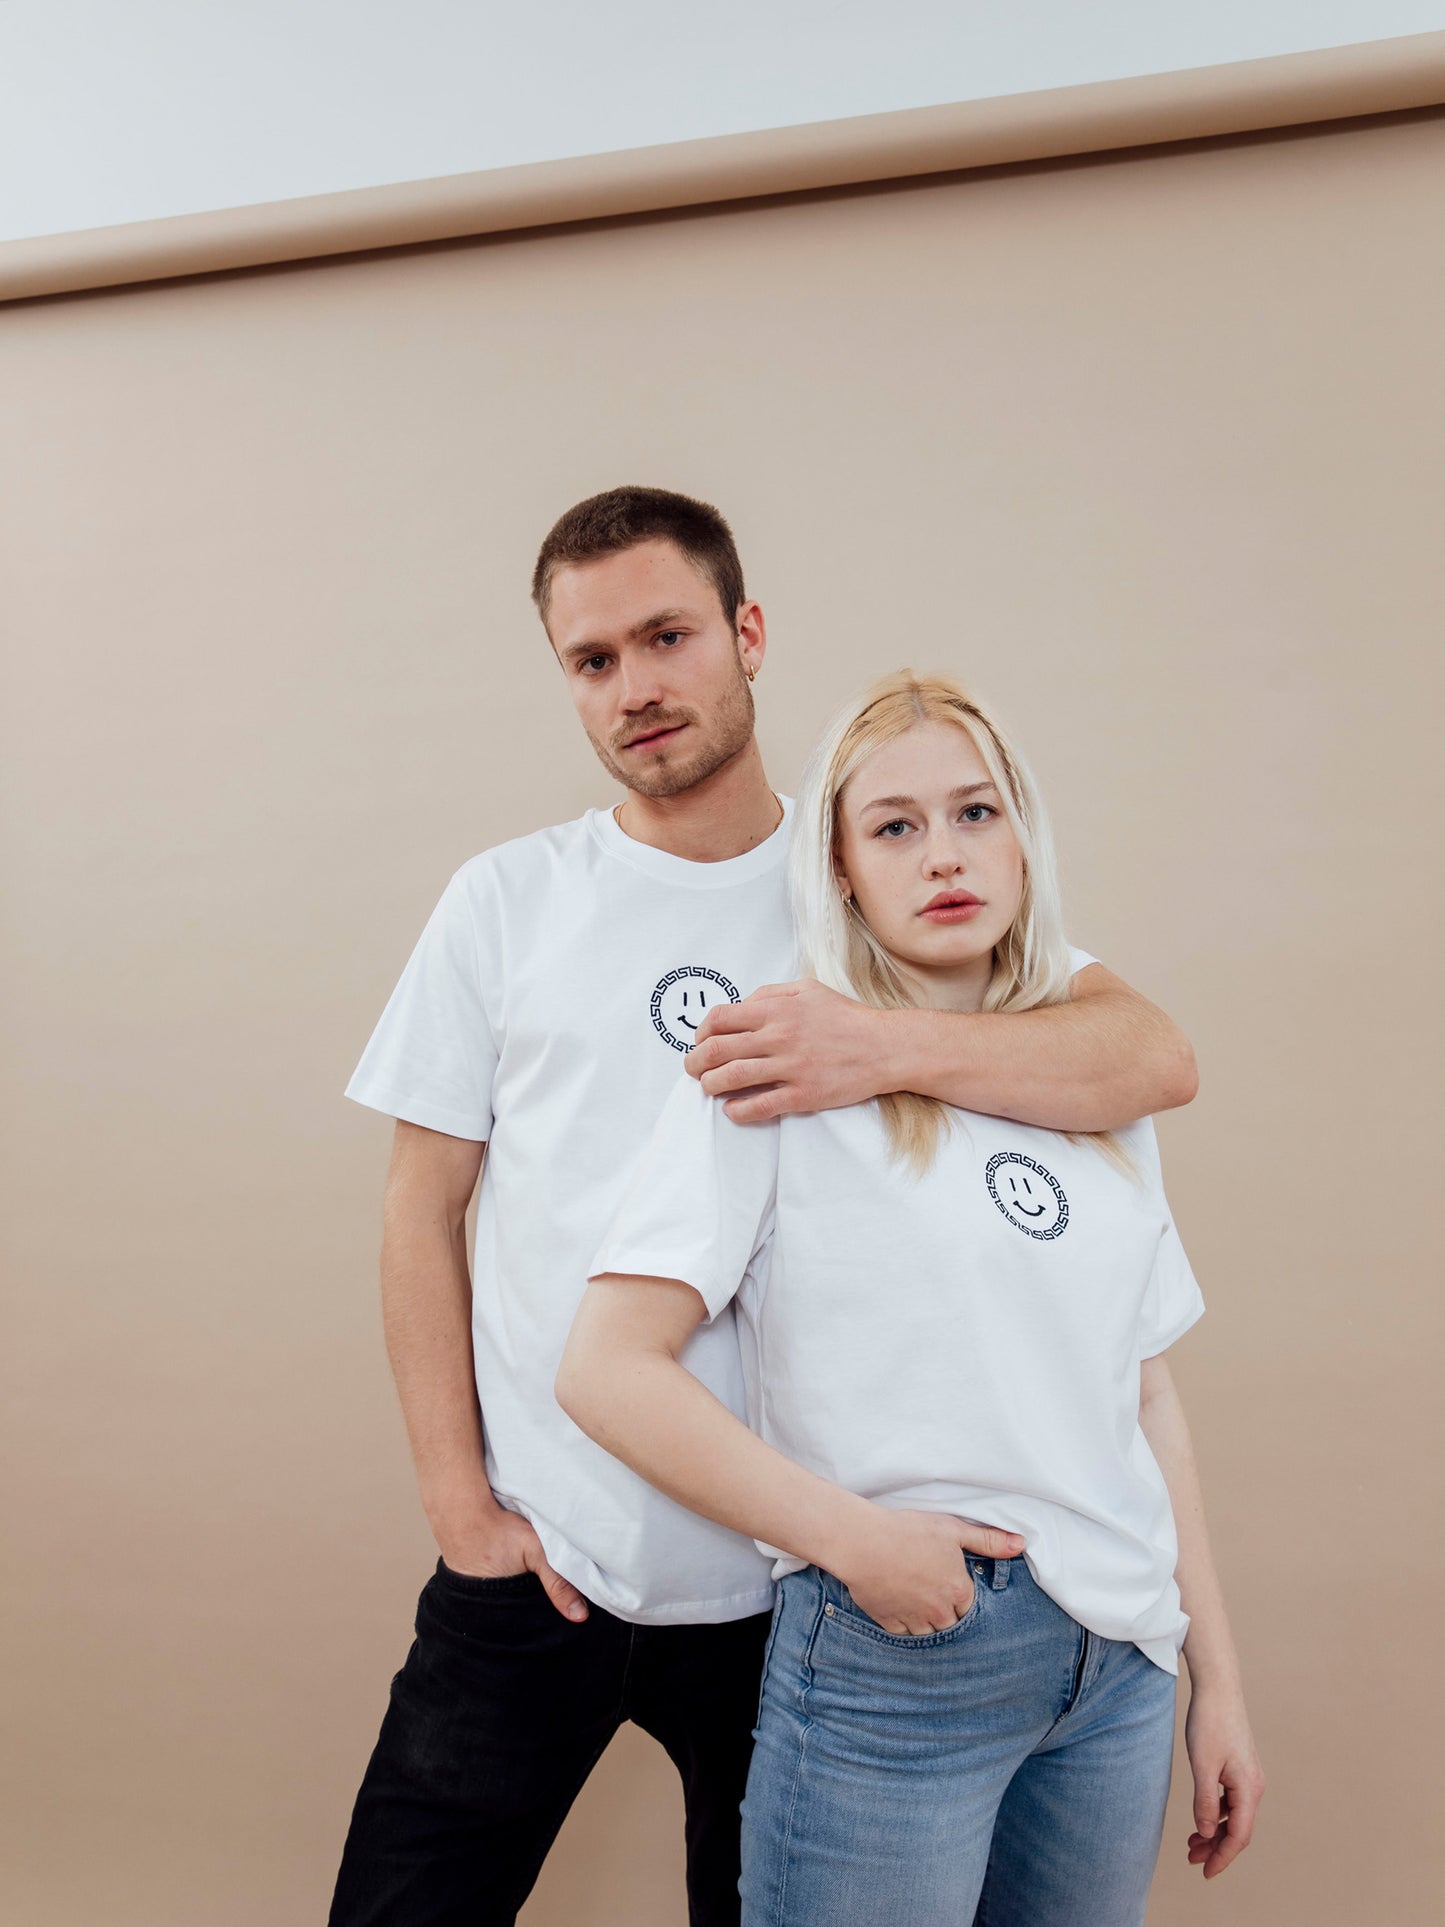 KITSCH BITCH Smiley Embroidery Unisex T-Shirt